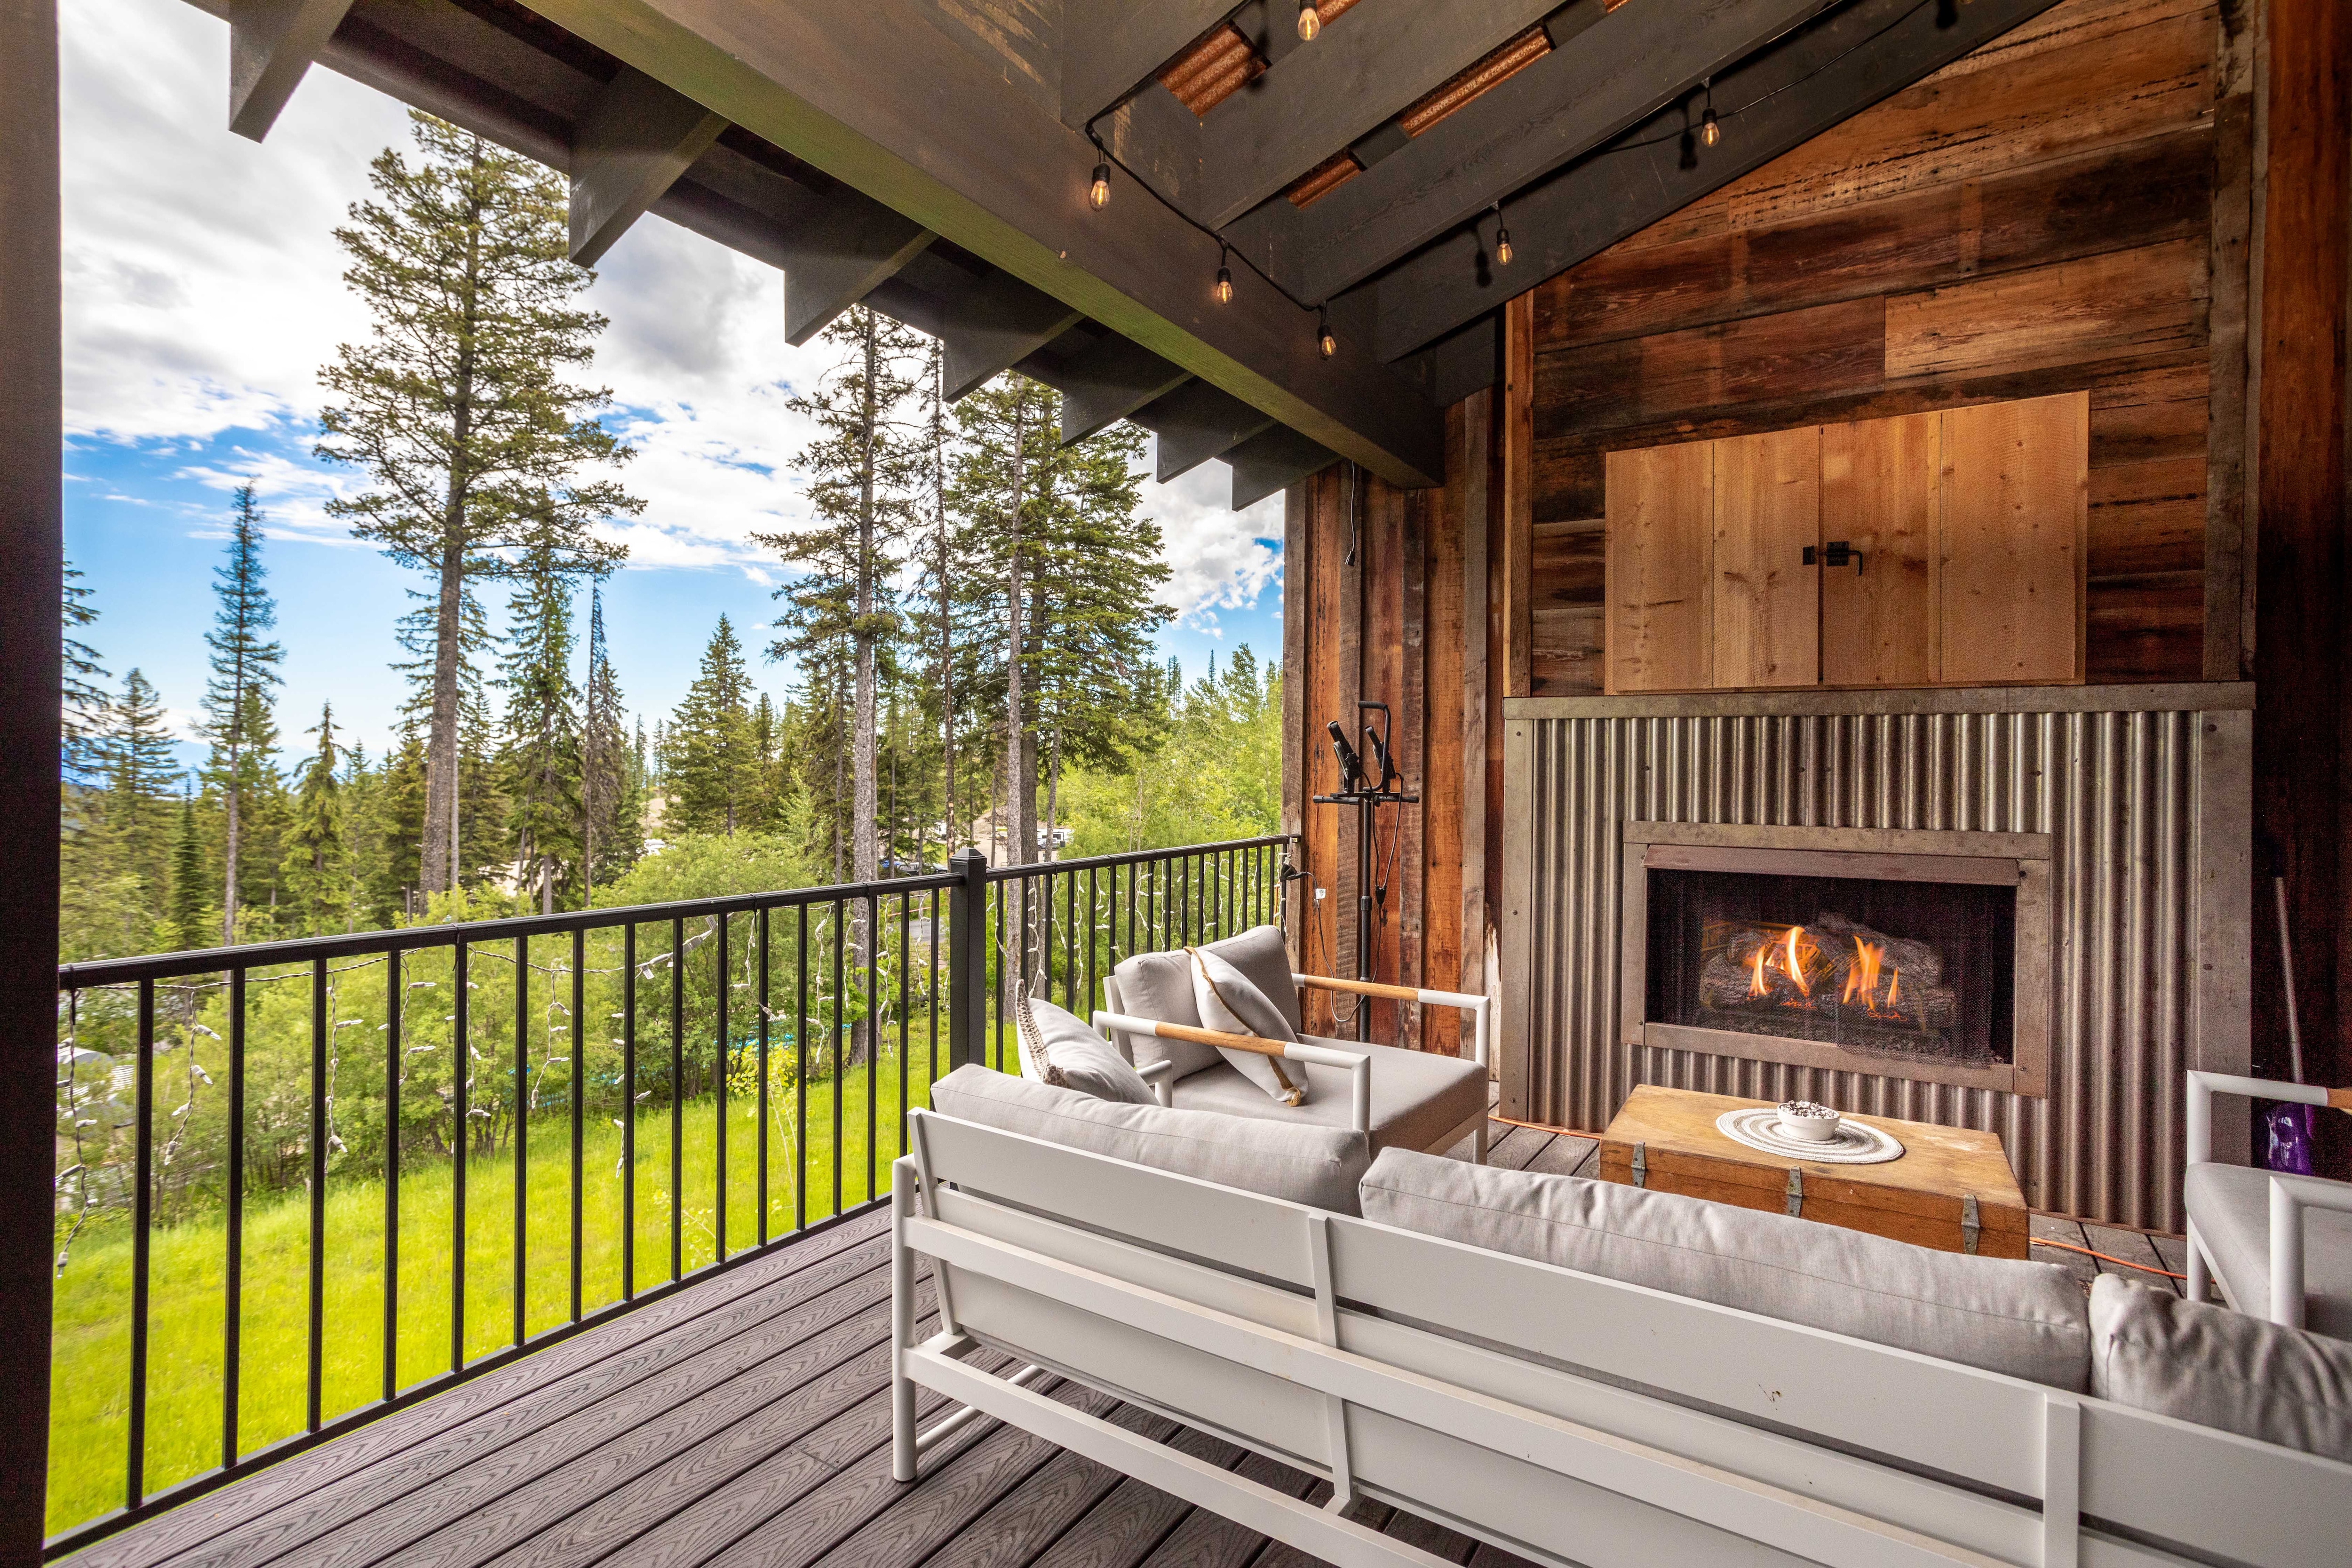 Cozy up by the outdoor fireplace and enjoy the beautiful views | Exterior